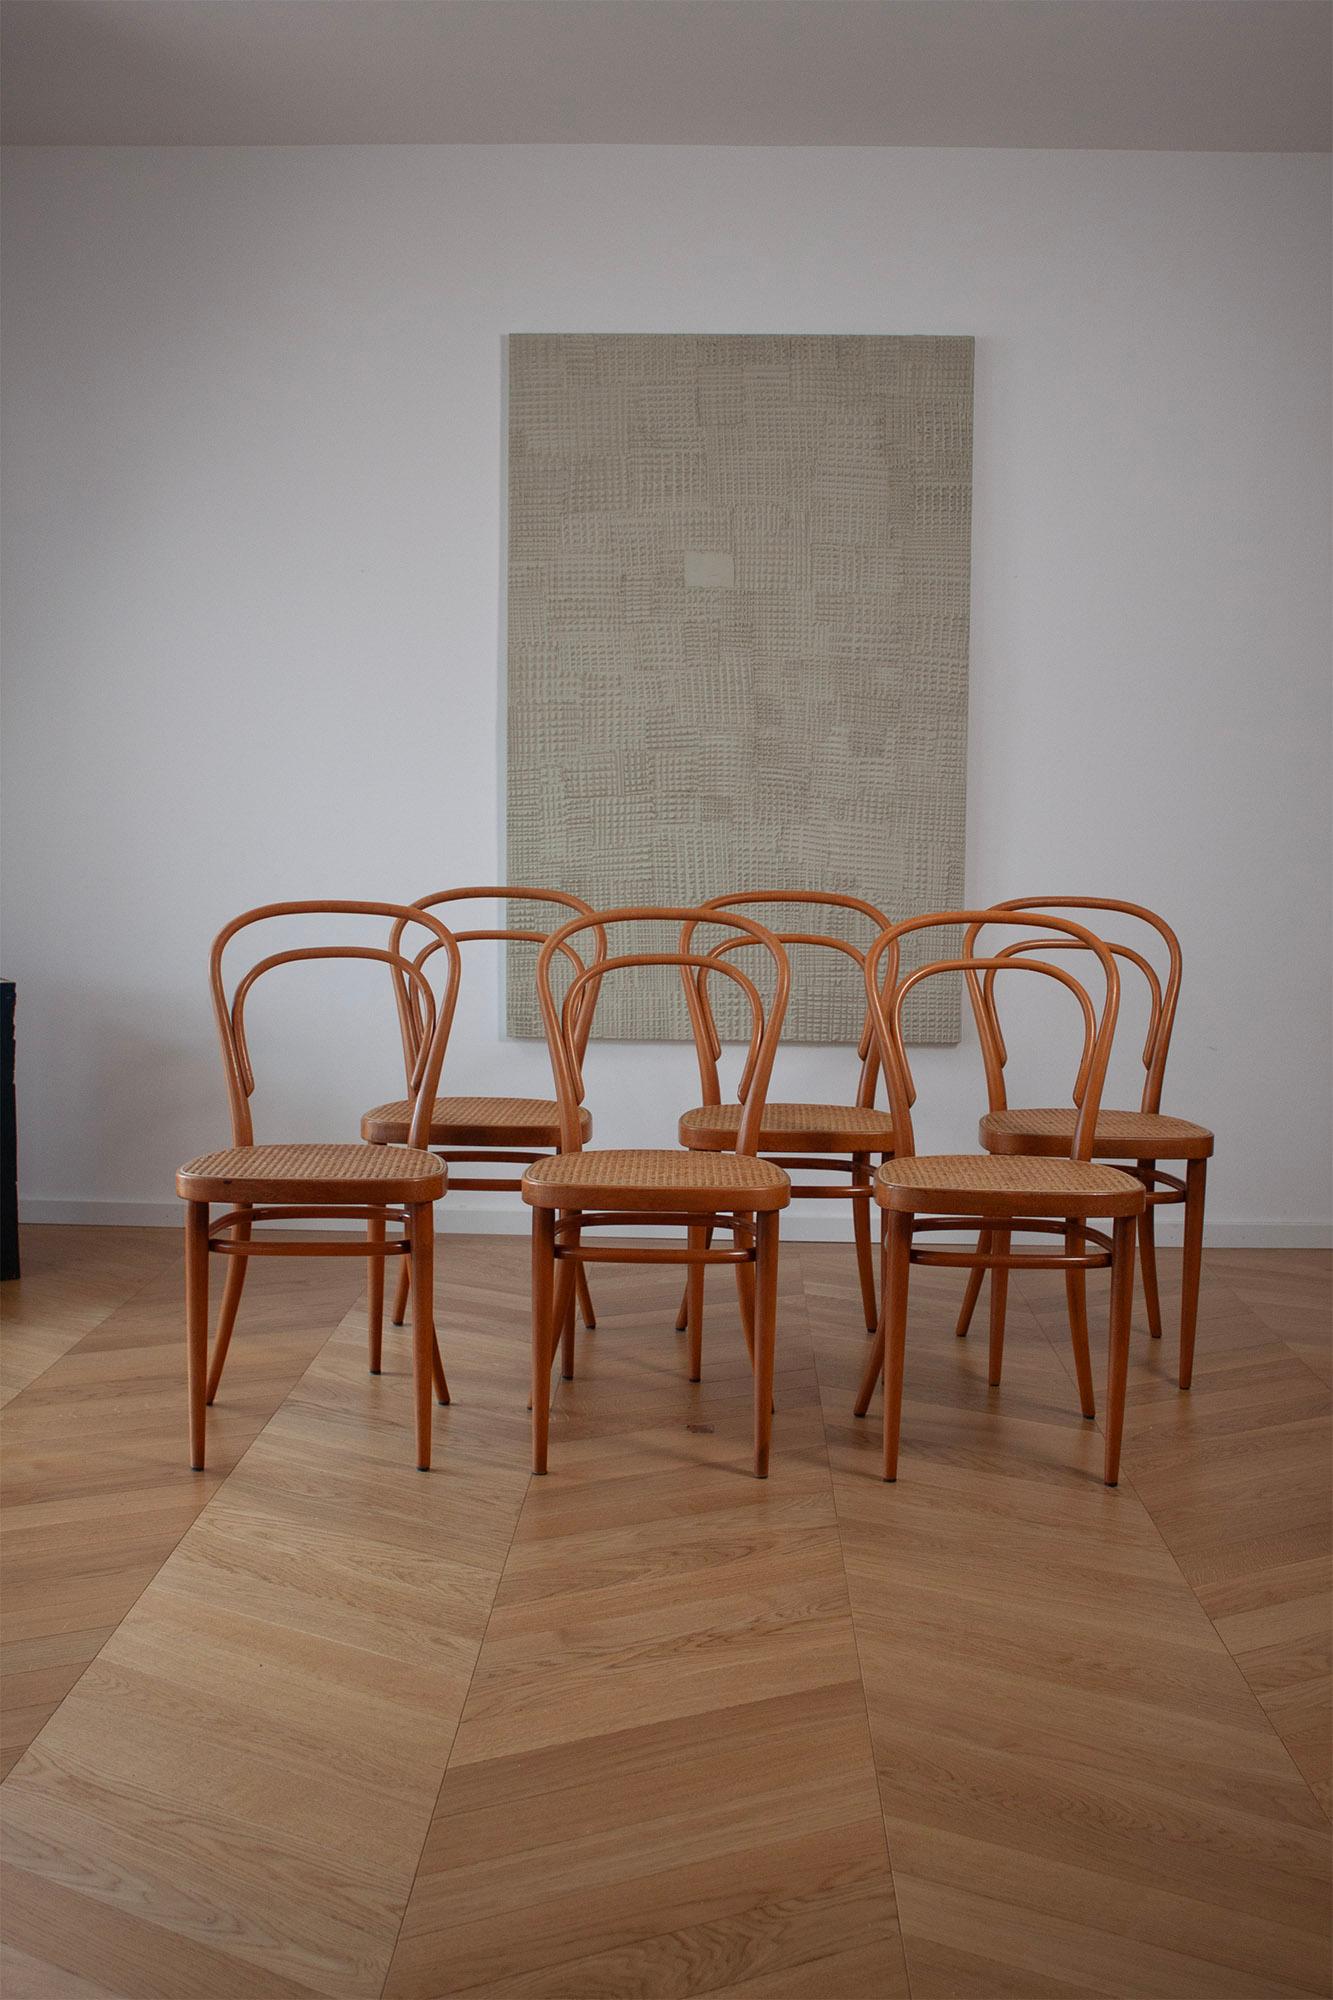 These six original 214 Tonet chairs encapsulate a rich history that spans over a century. From their humble beginnings in the mid-19th century to their iconic status today. The journey of the vintage 214 Thonet chairs begins with the pioneering